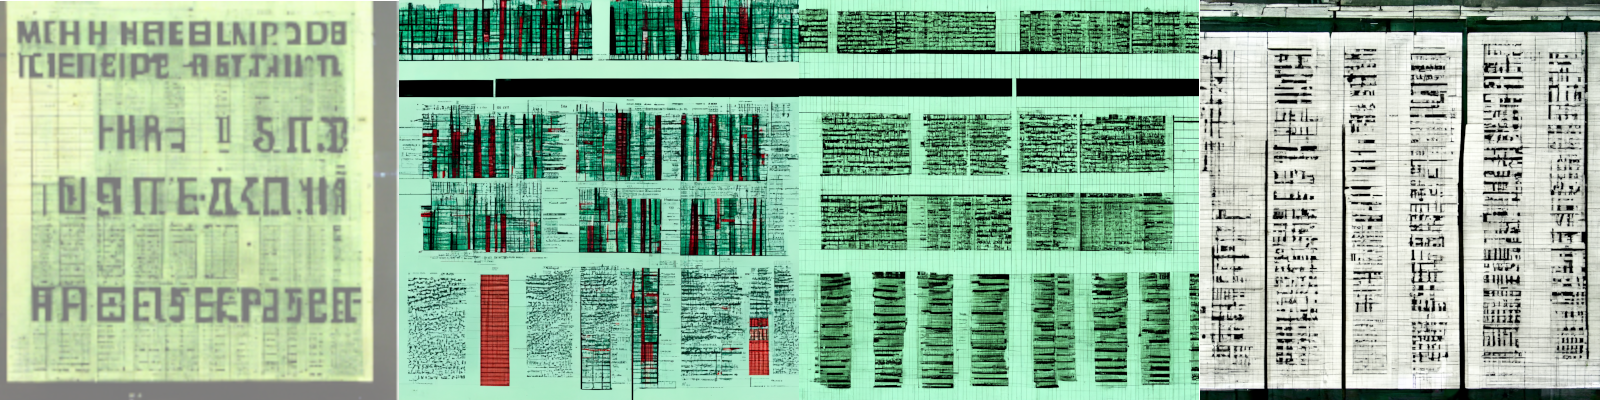 The source material: alien documents captured on microfiche